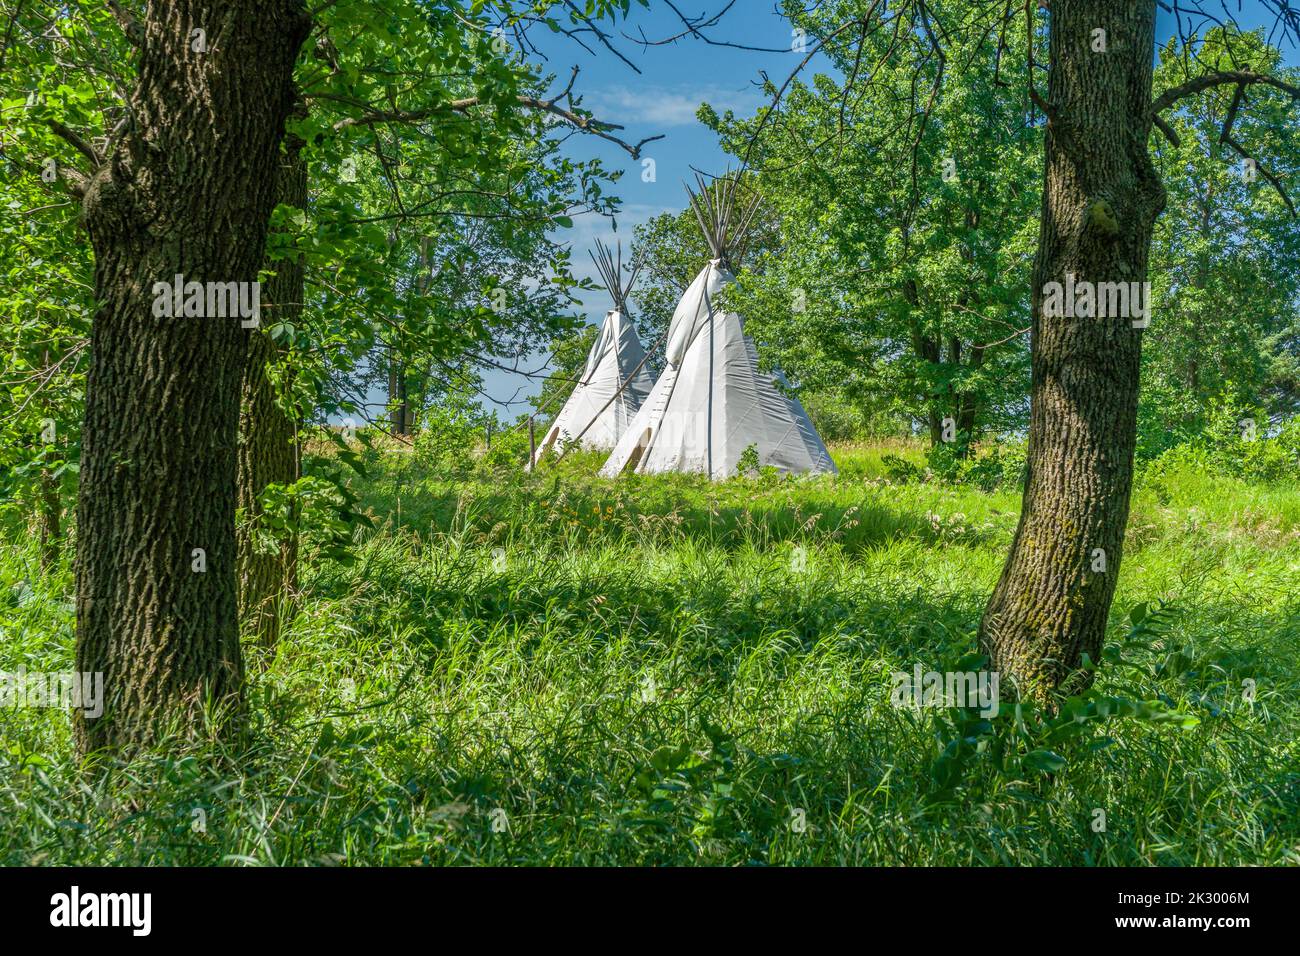 Native American Tipi tents at Blue Mounds State Park, Minnesota Stock Photo